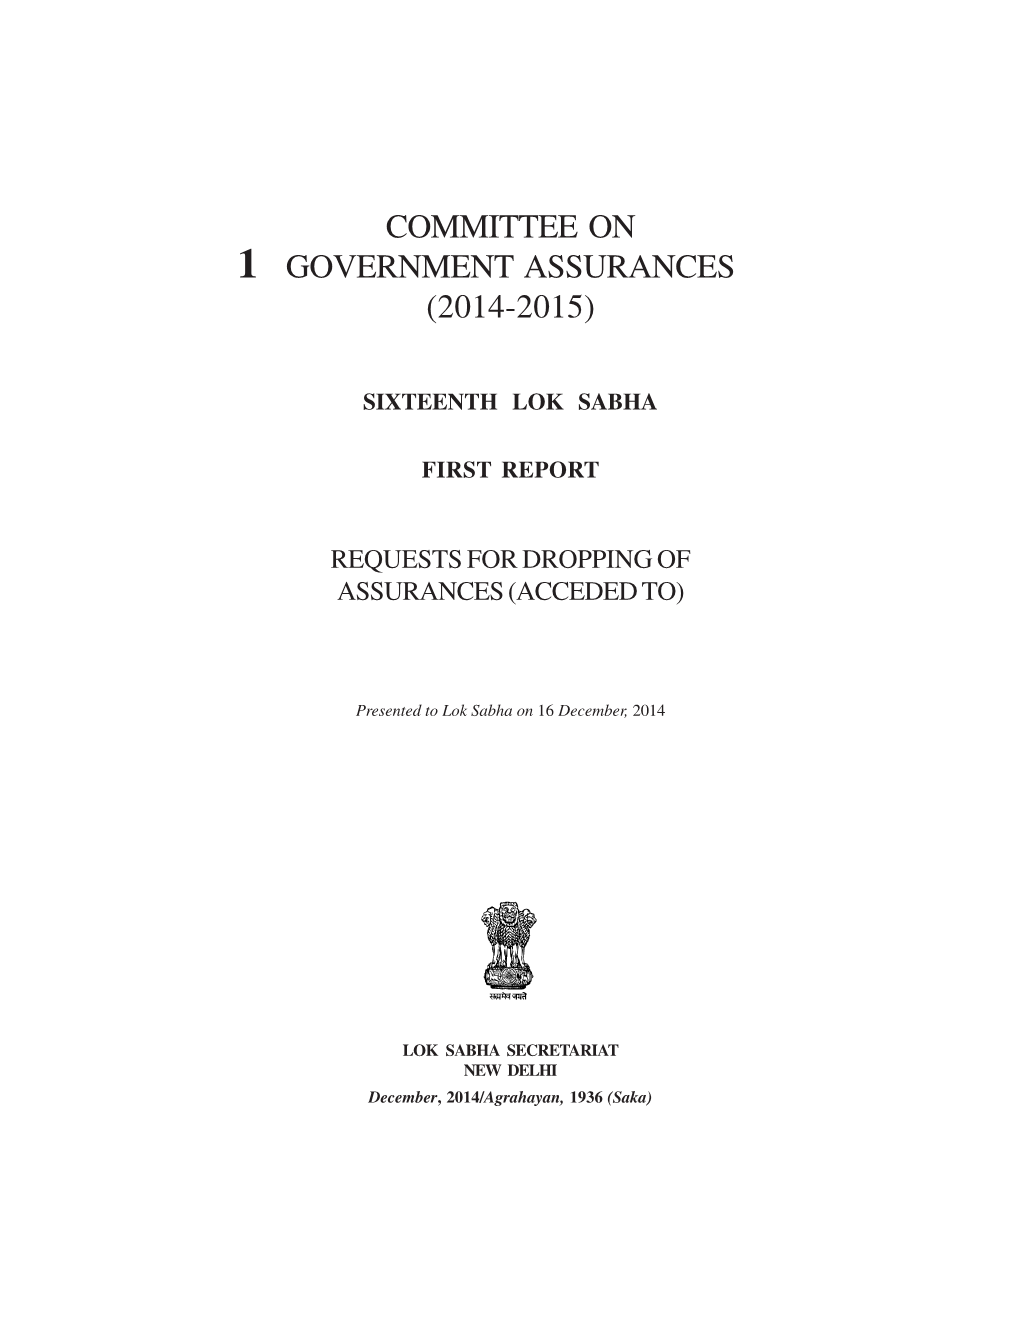 Committee on Government Assurances (2014-2015)